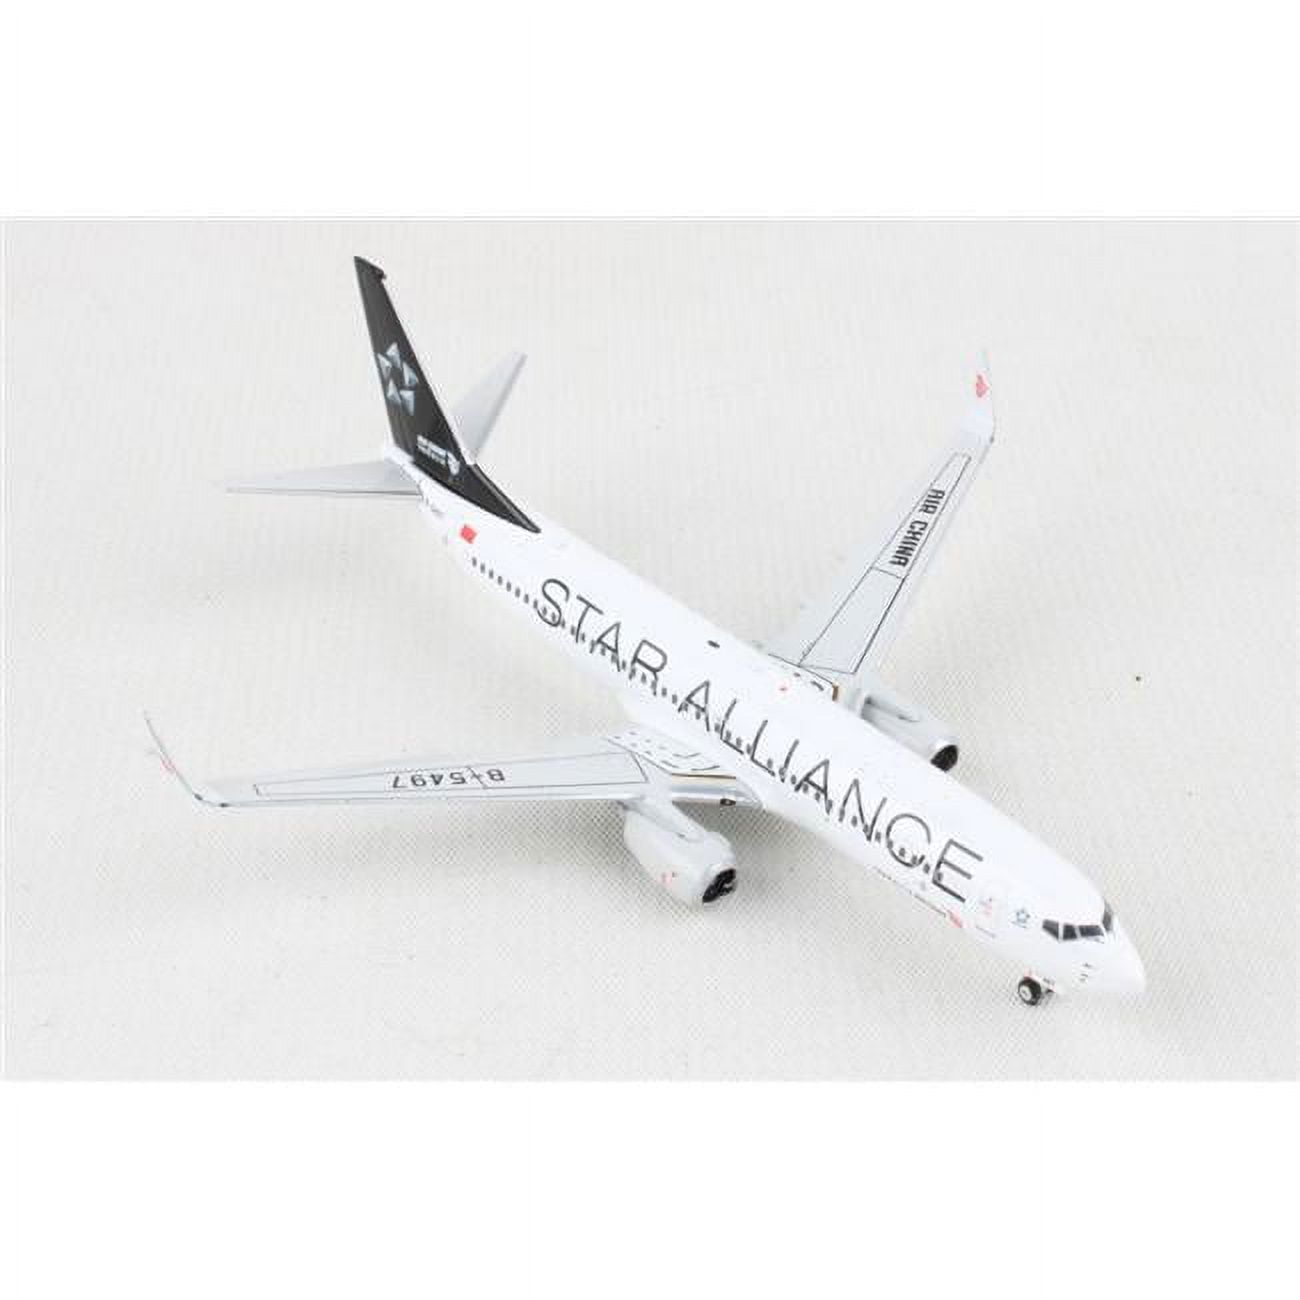 Picture of Phoenix PH2366 1-400 Scale Reg No.B-5497 Star Alliance Air China Model Plane for 737-800